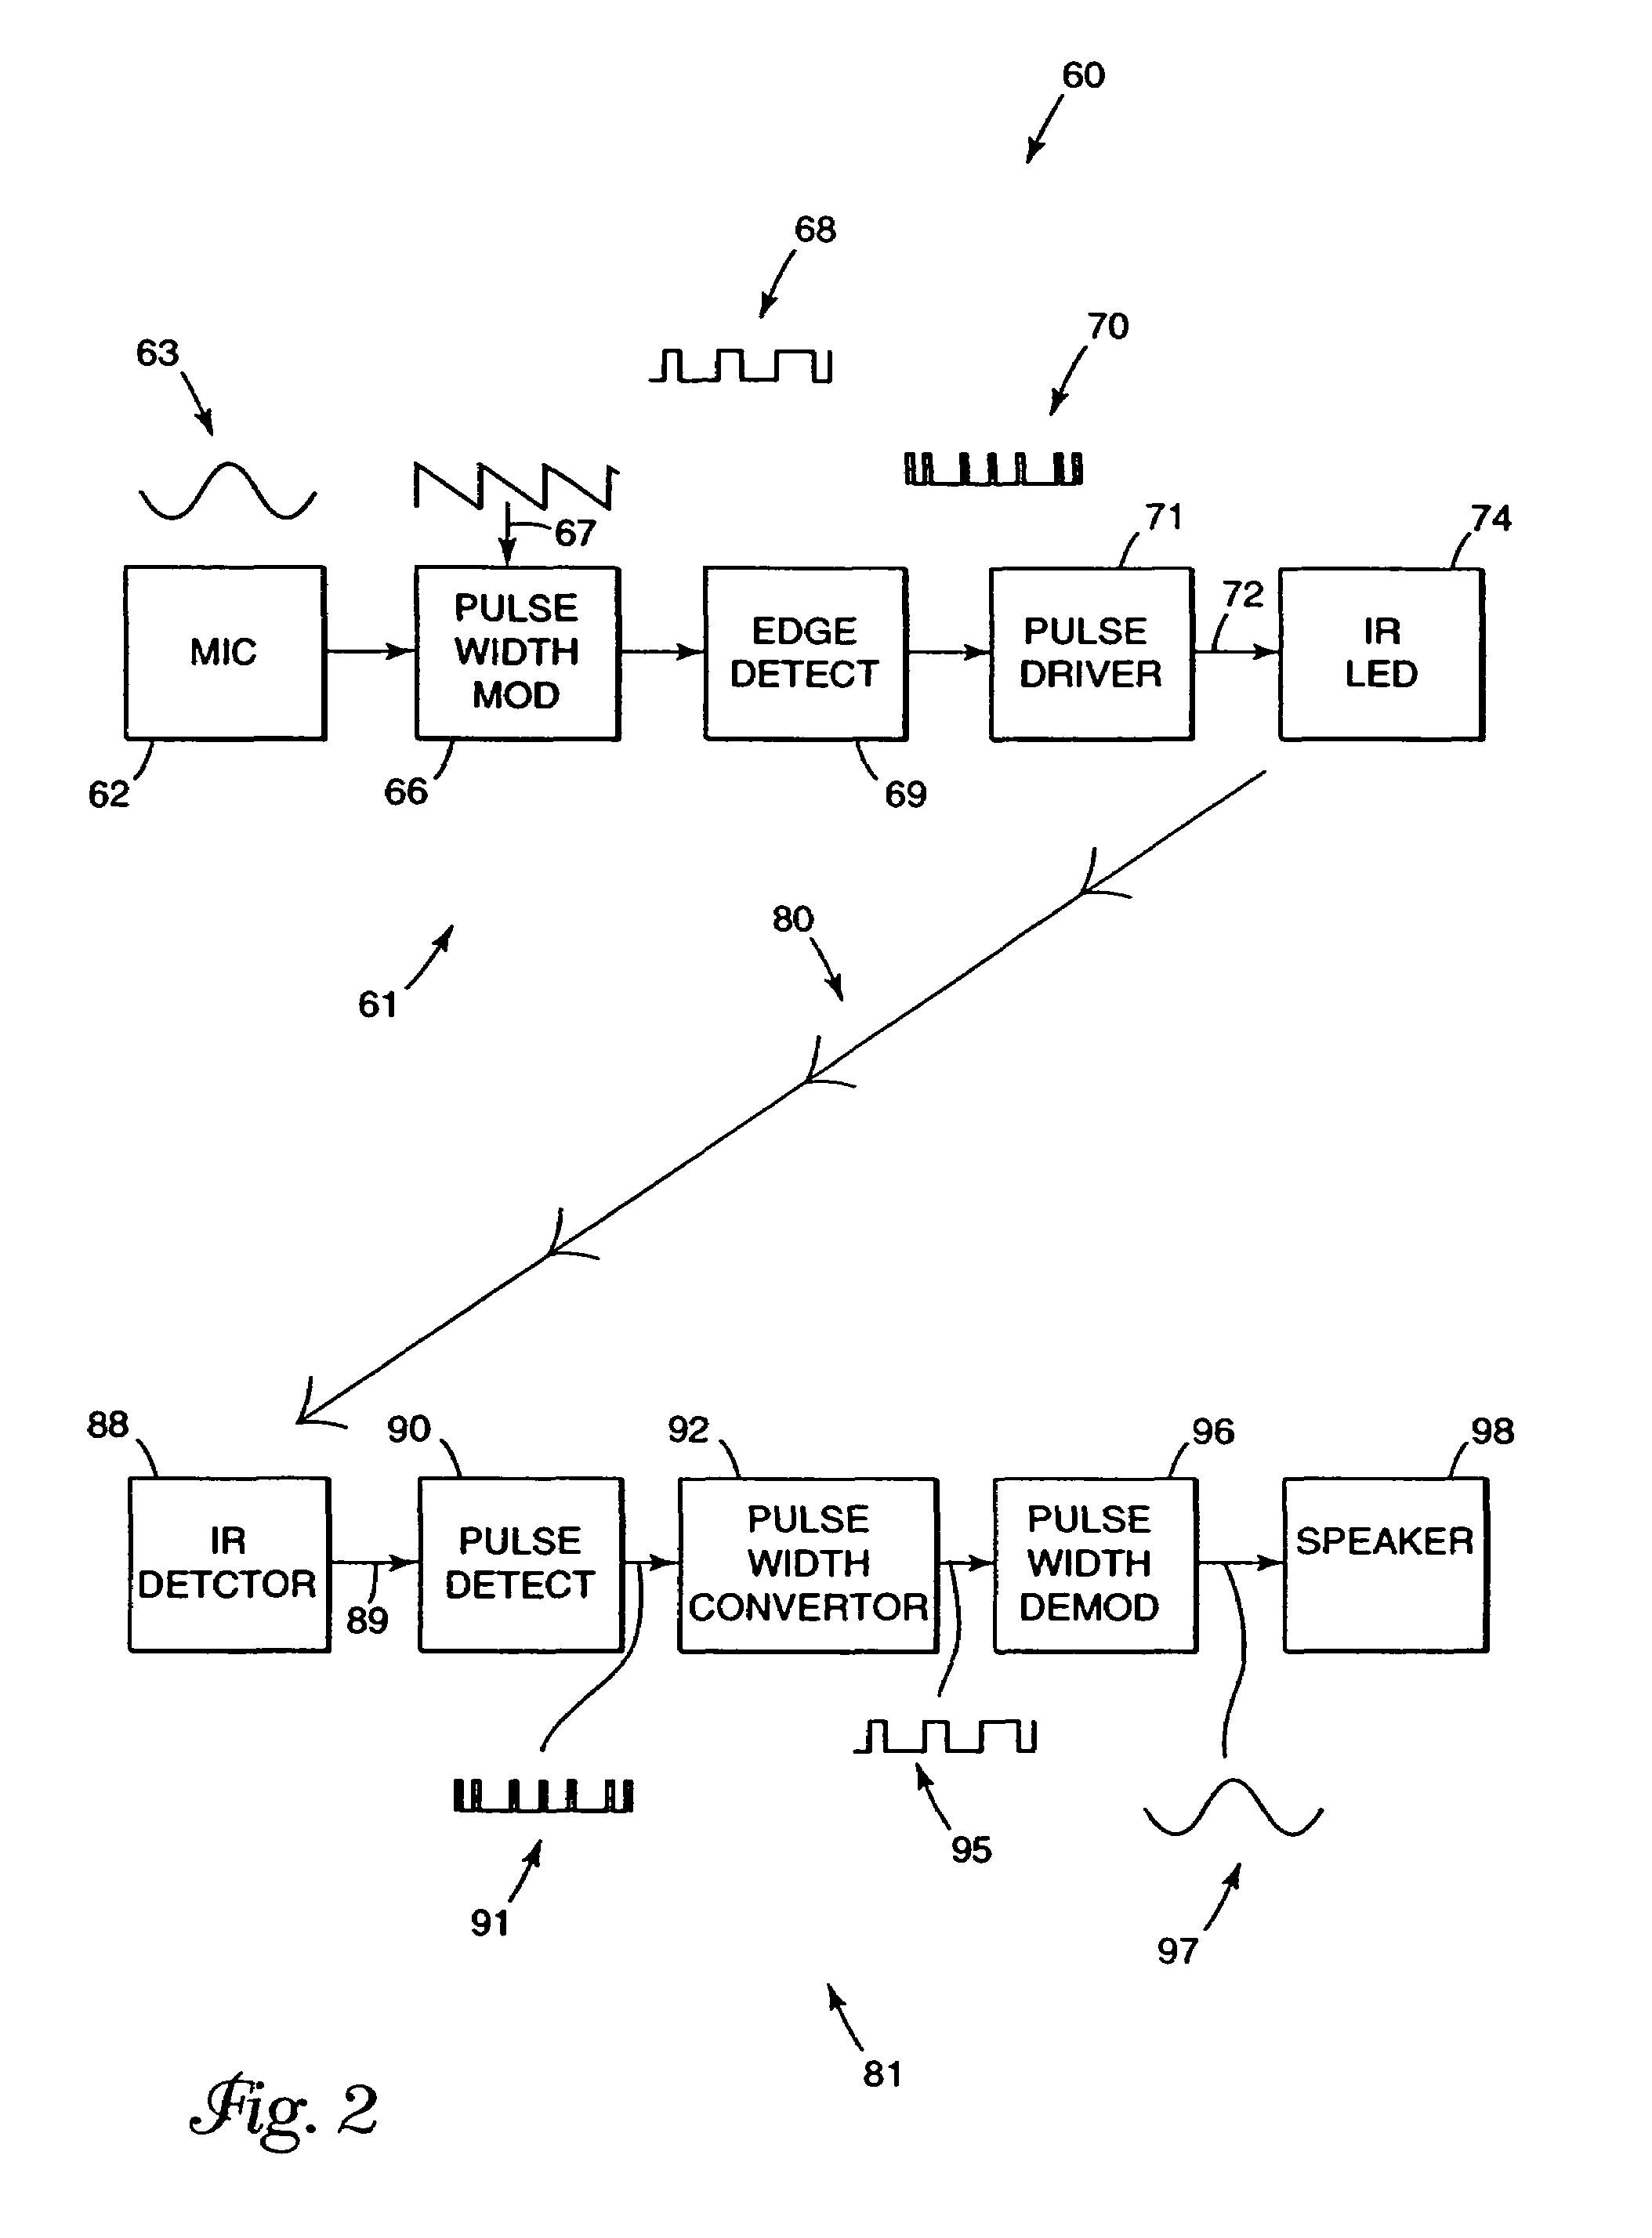 Low power infrared portable communication system with wireless receiver and methods regarding same